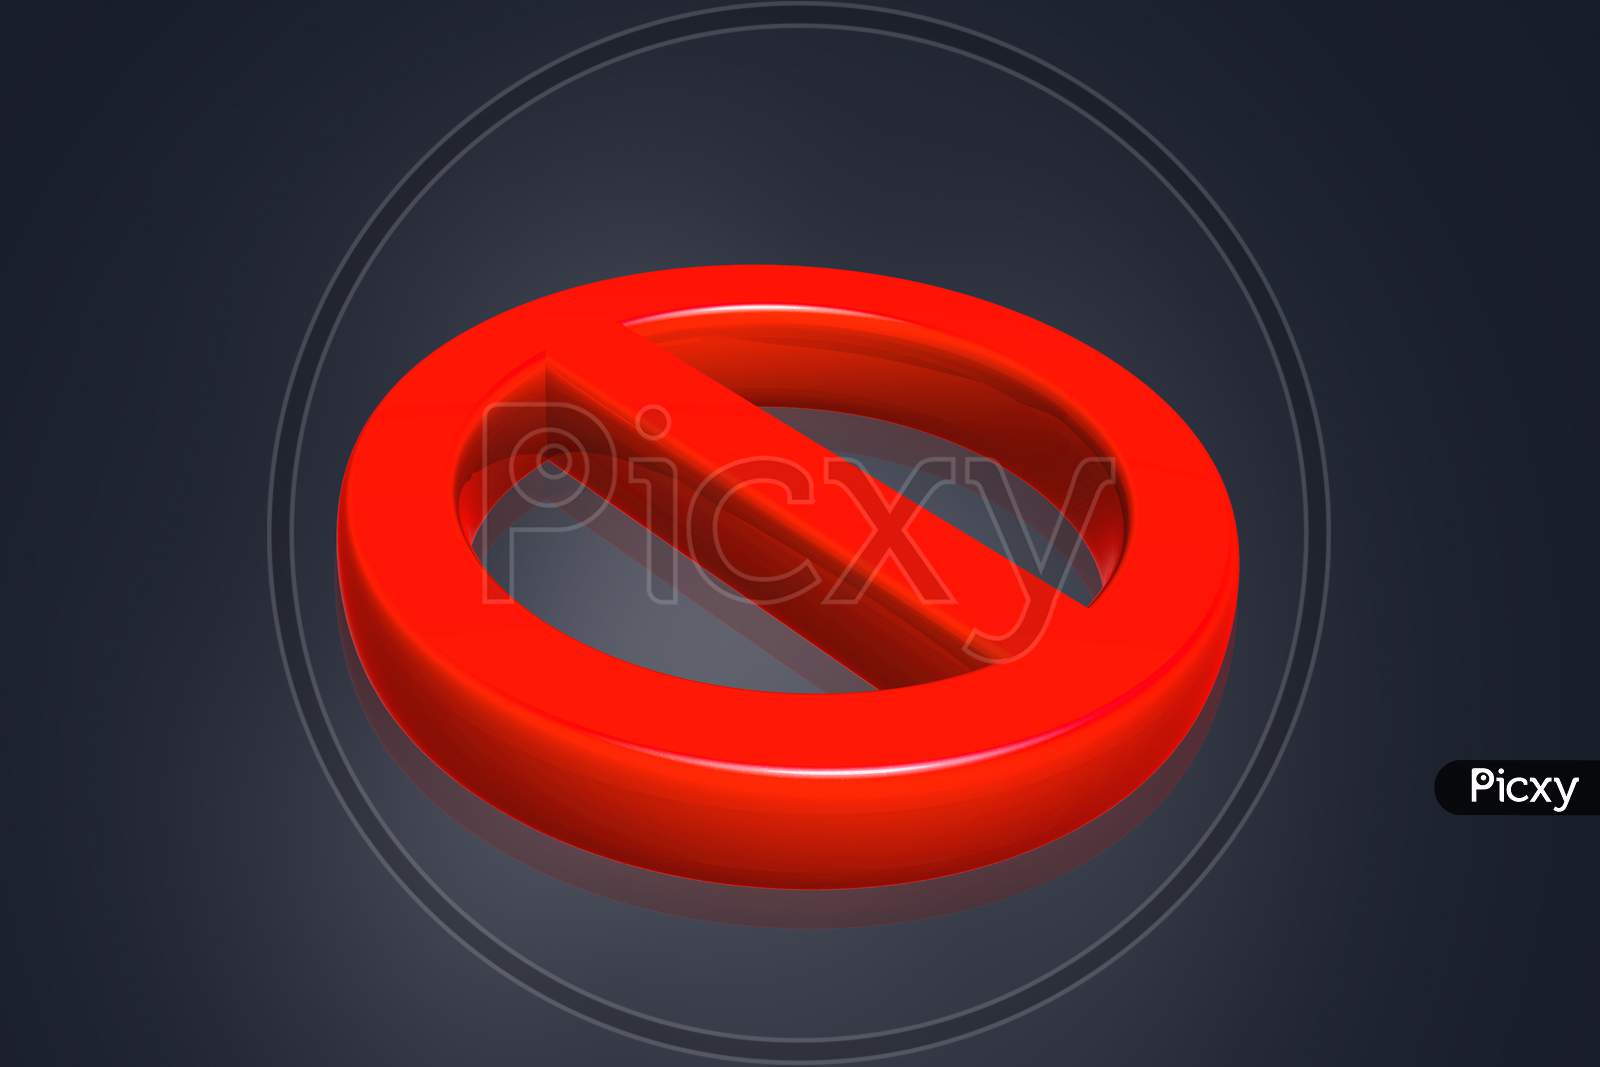 3D Multi-Use No Admittance Sign In Color Background